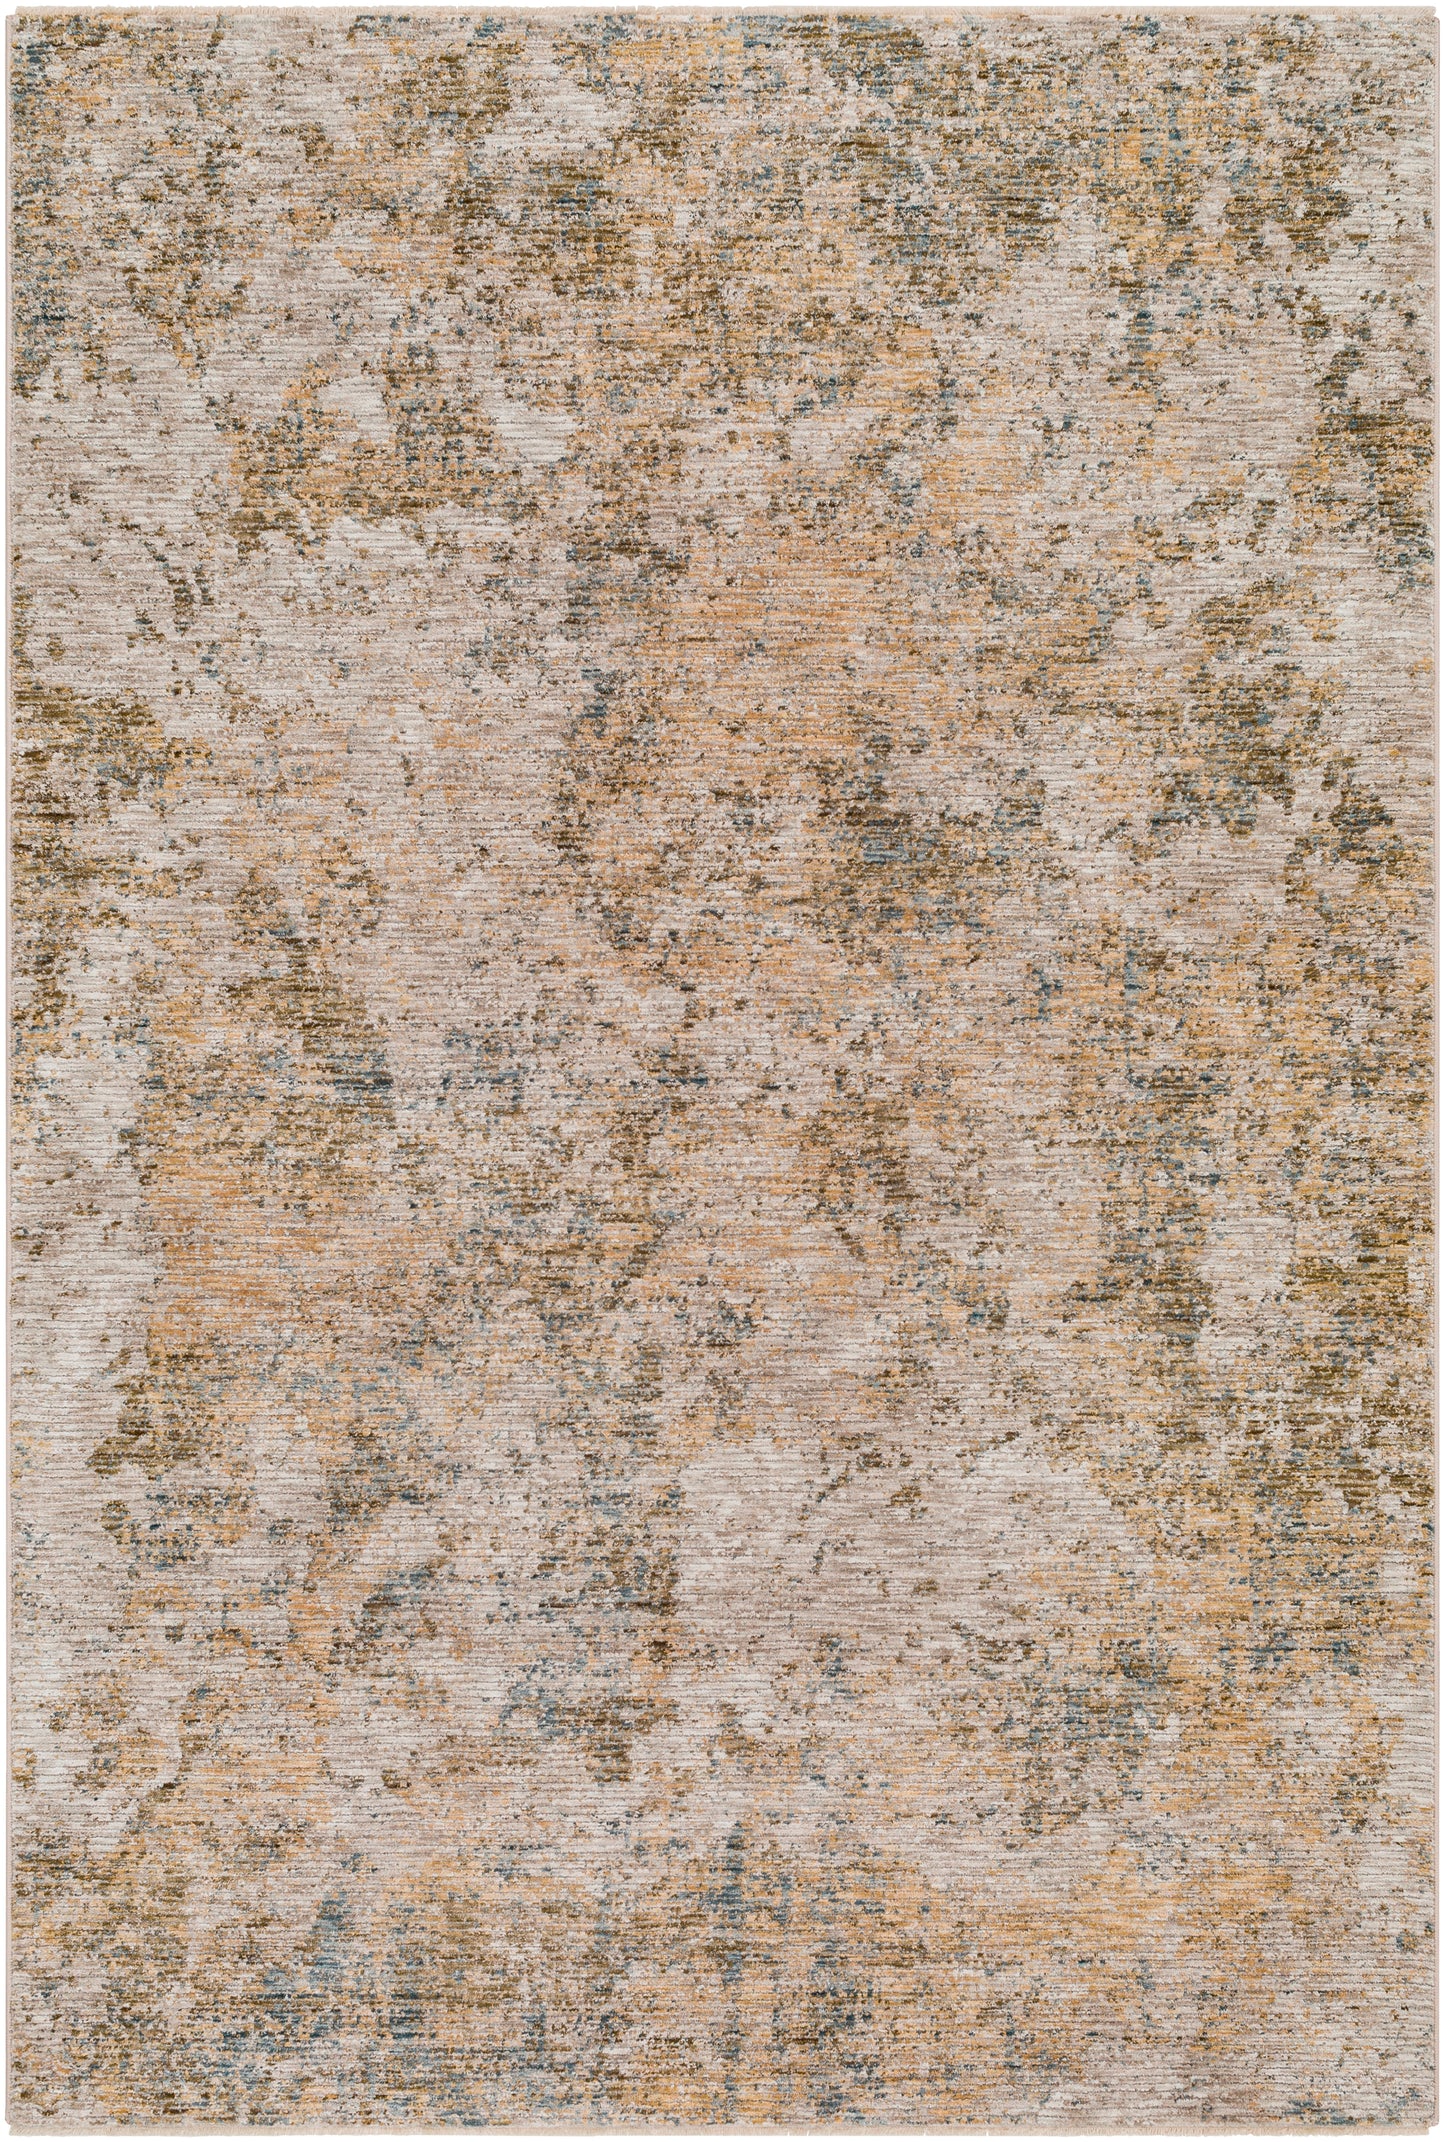 Naila 31171 Machine Woven Synthetic Blend Indoor Area Rug by Surya Rugs